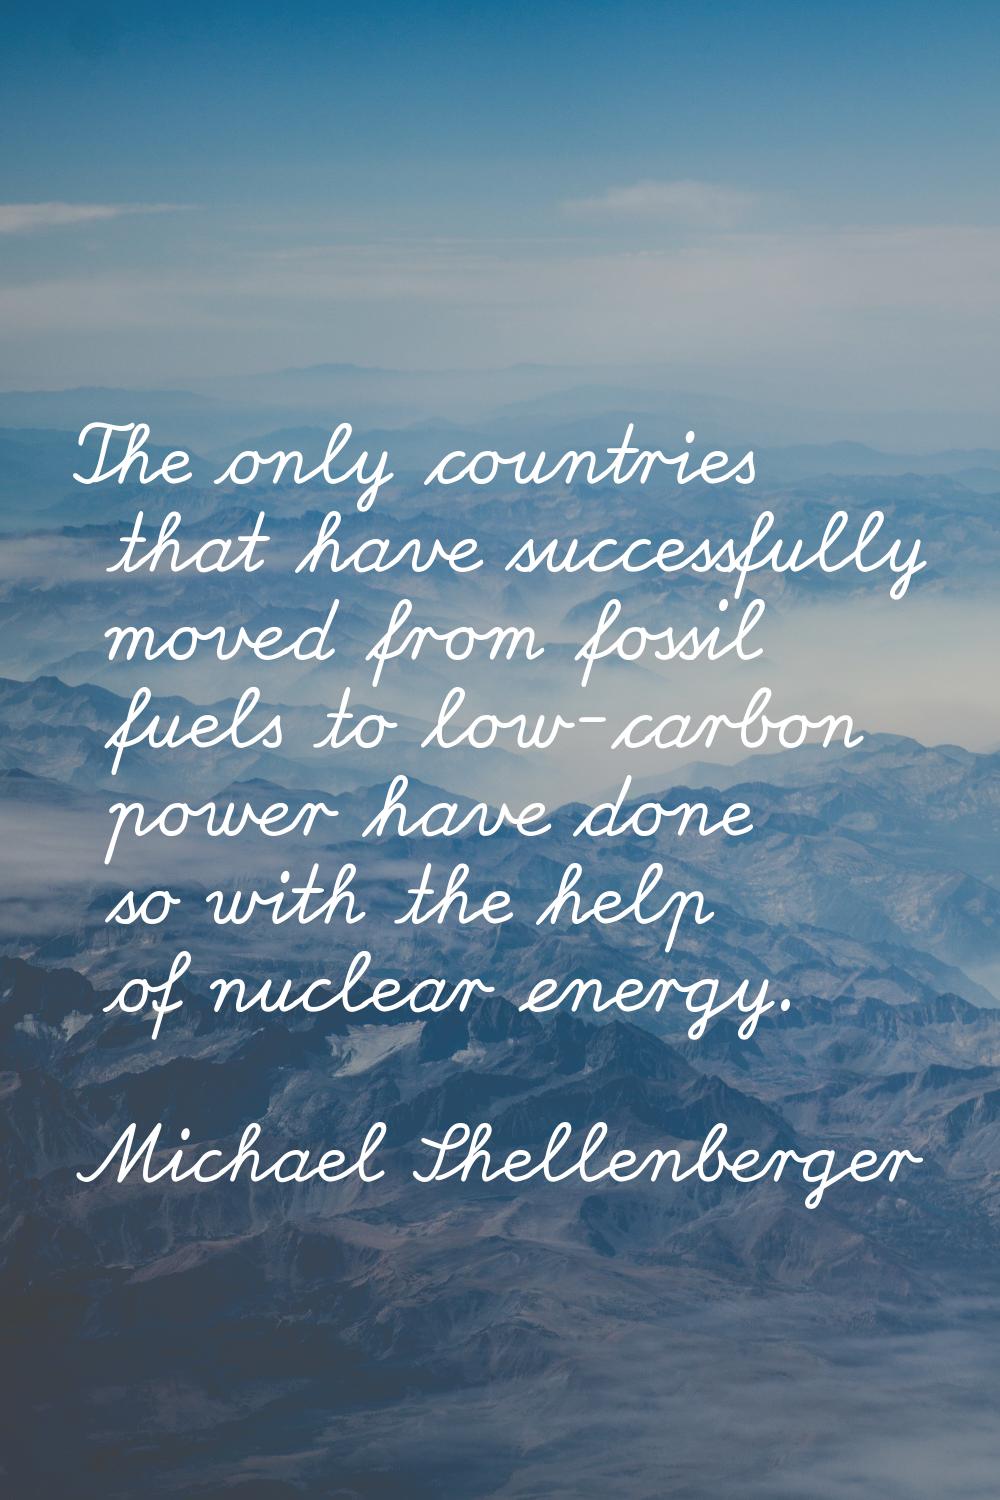 The only countries that have successfully moved from fossil fuels to low-carbon power have done so 